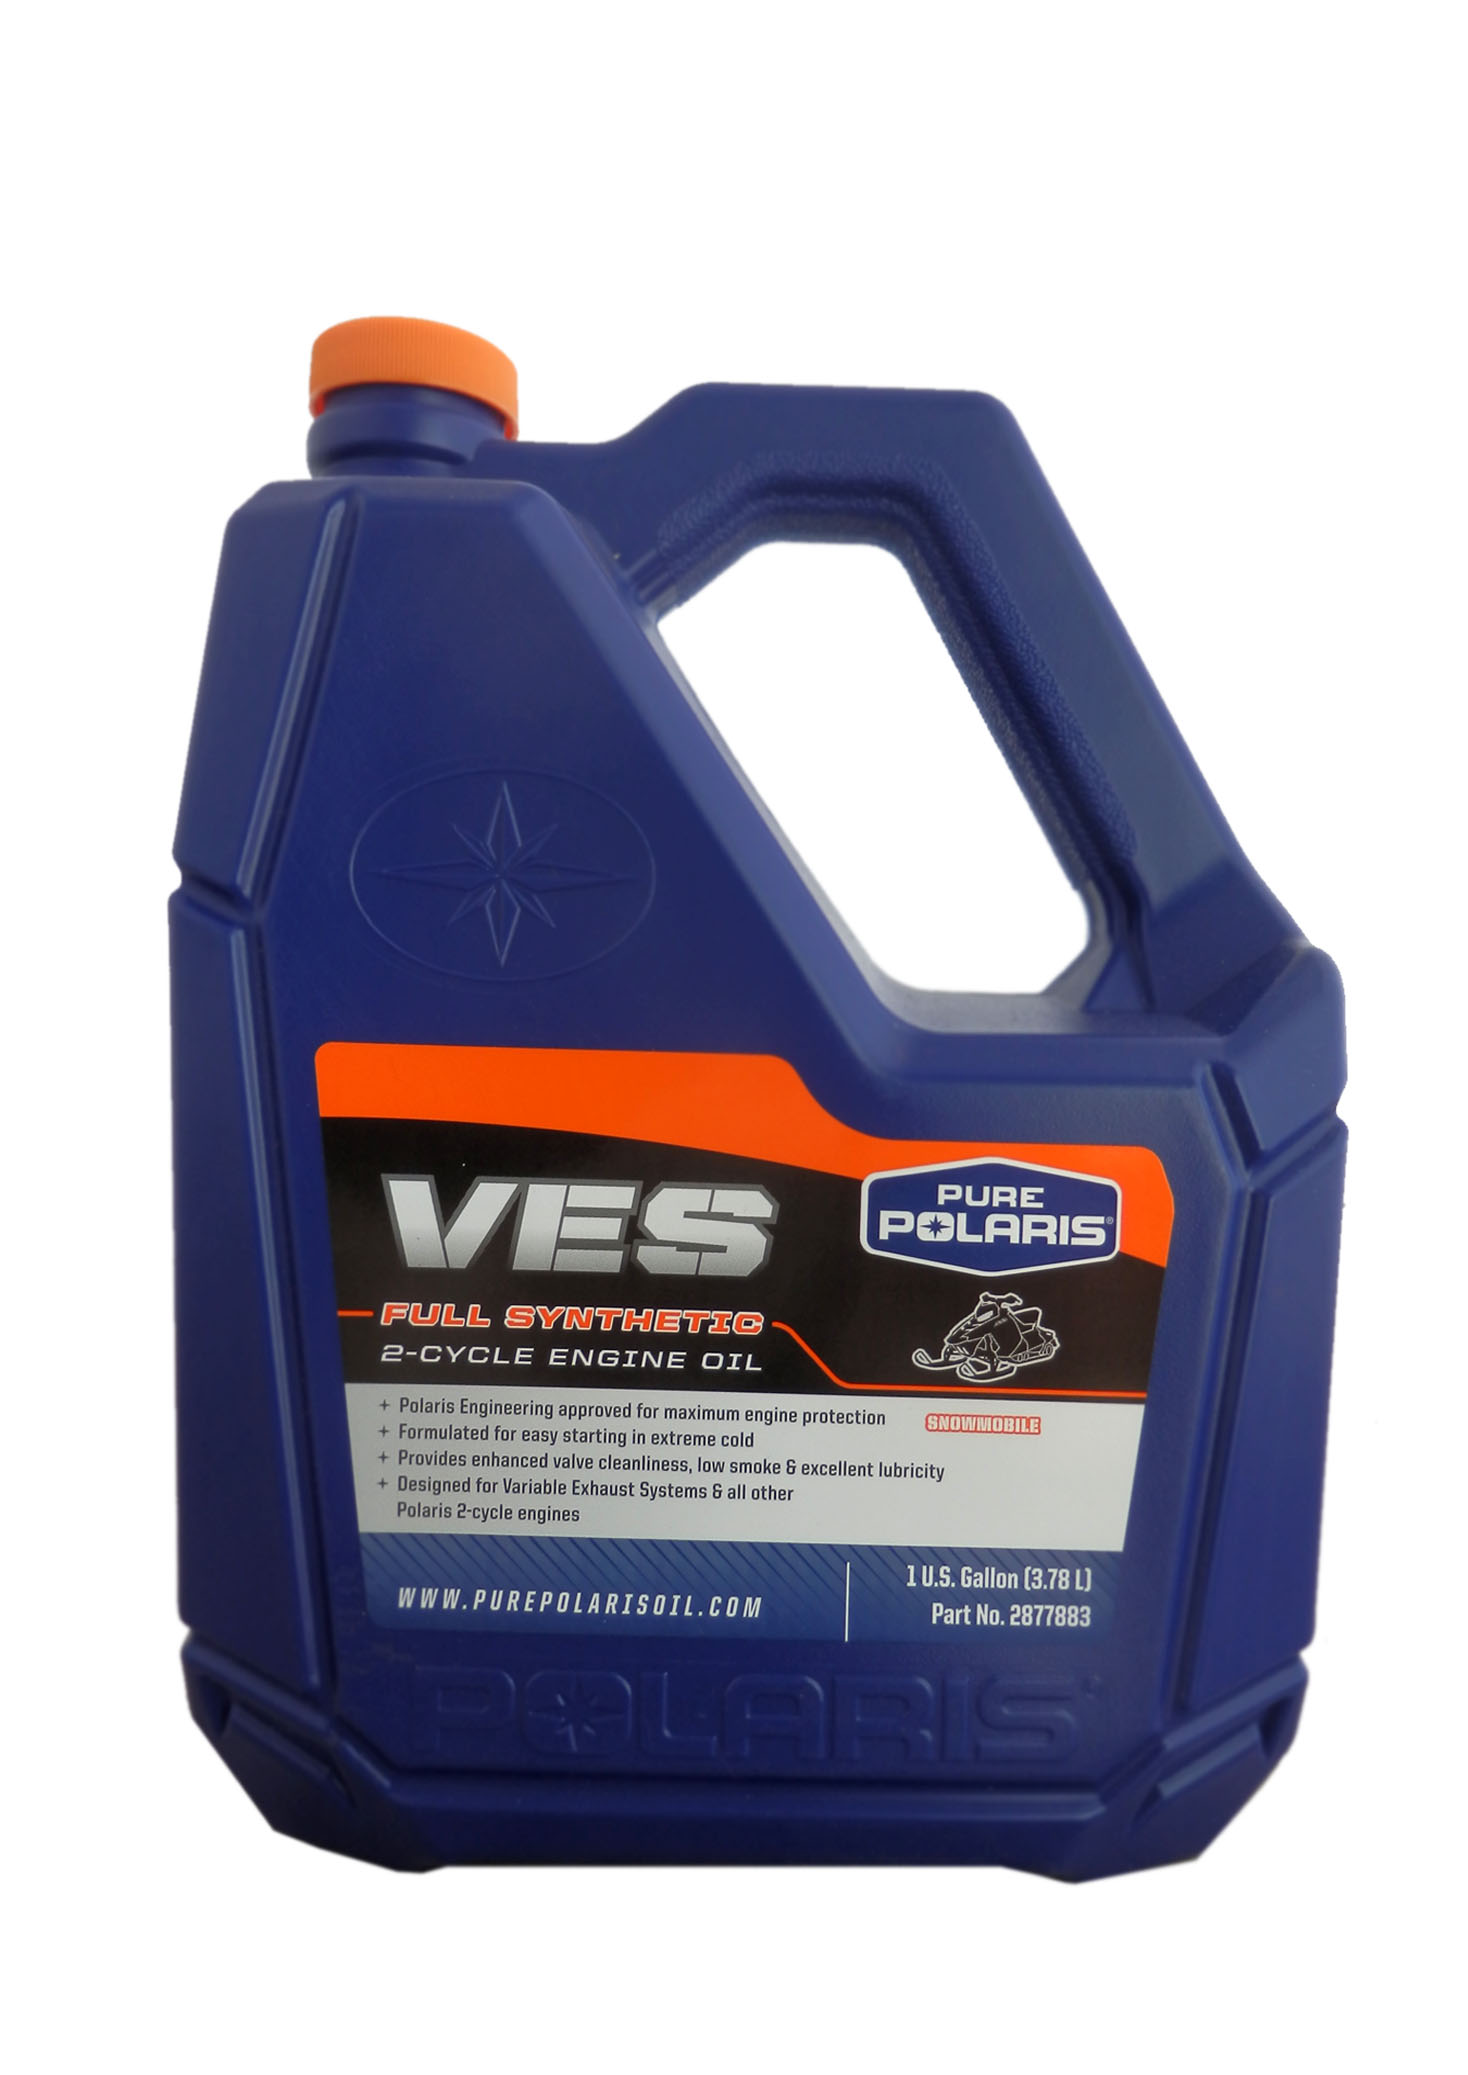 Моторное масло Polaris 2877883 VES Full Synthetic 2-cycle Engine Oil  3.78 л